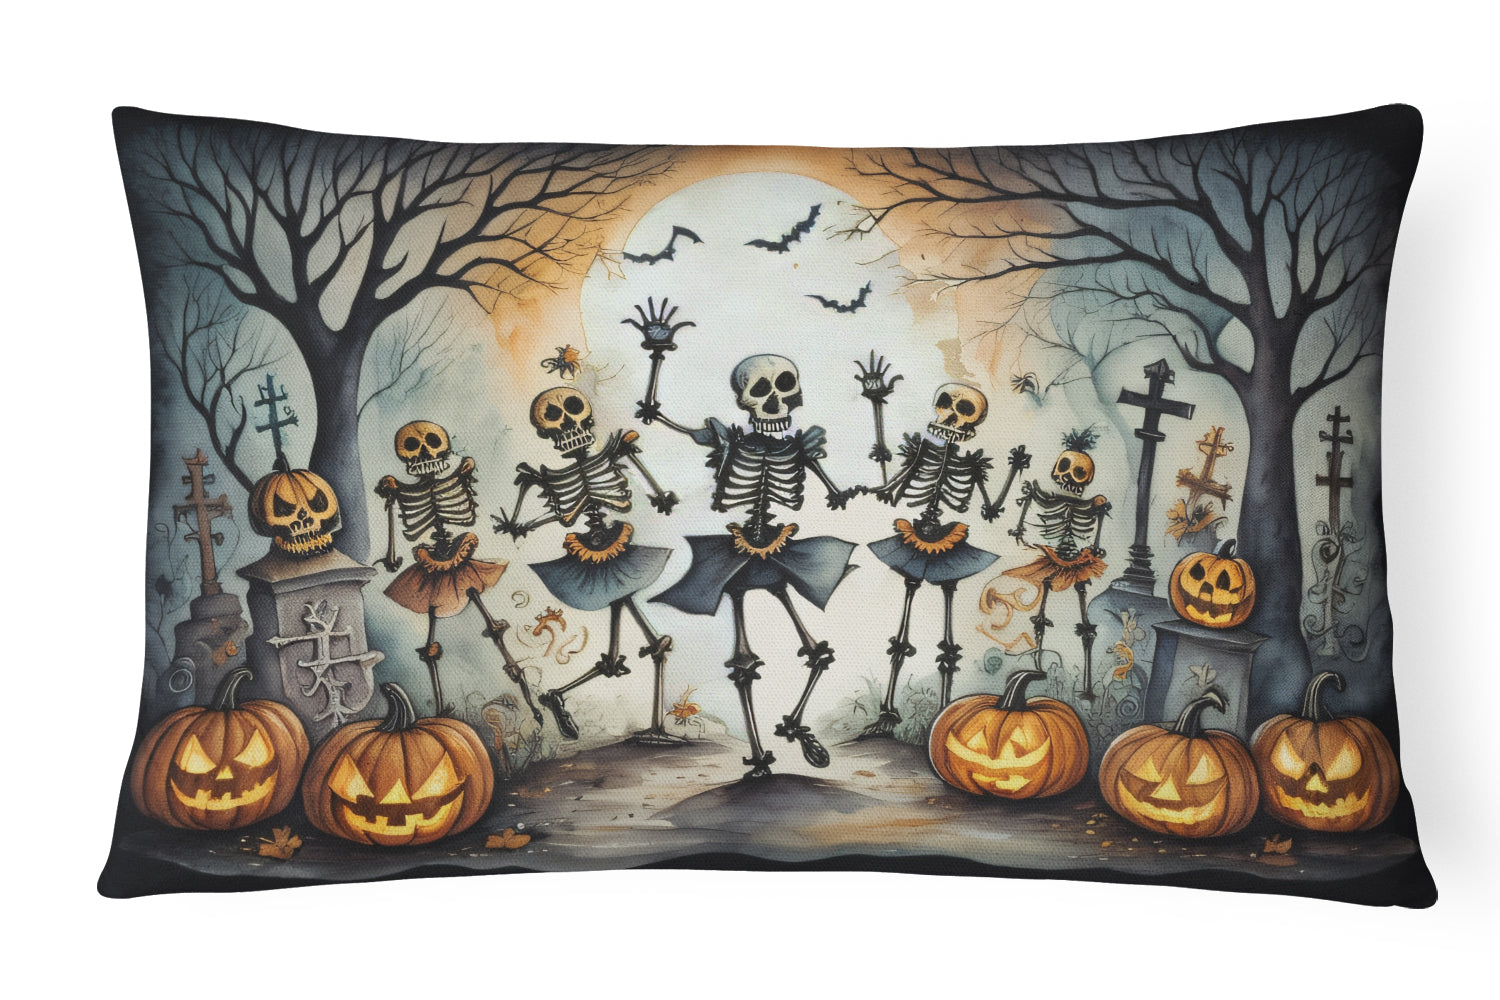 Buy this Dancing Skeletons Spooky Halloween Fabric Decorative Pillow